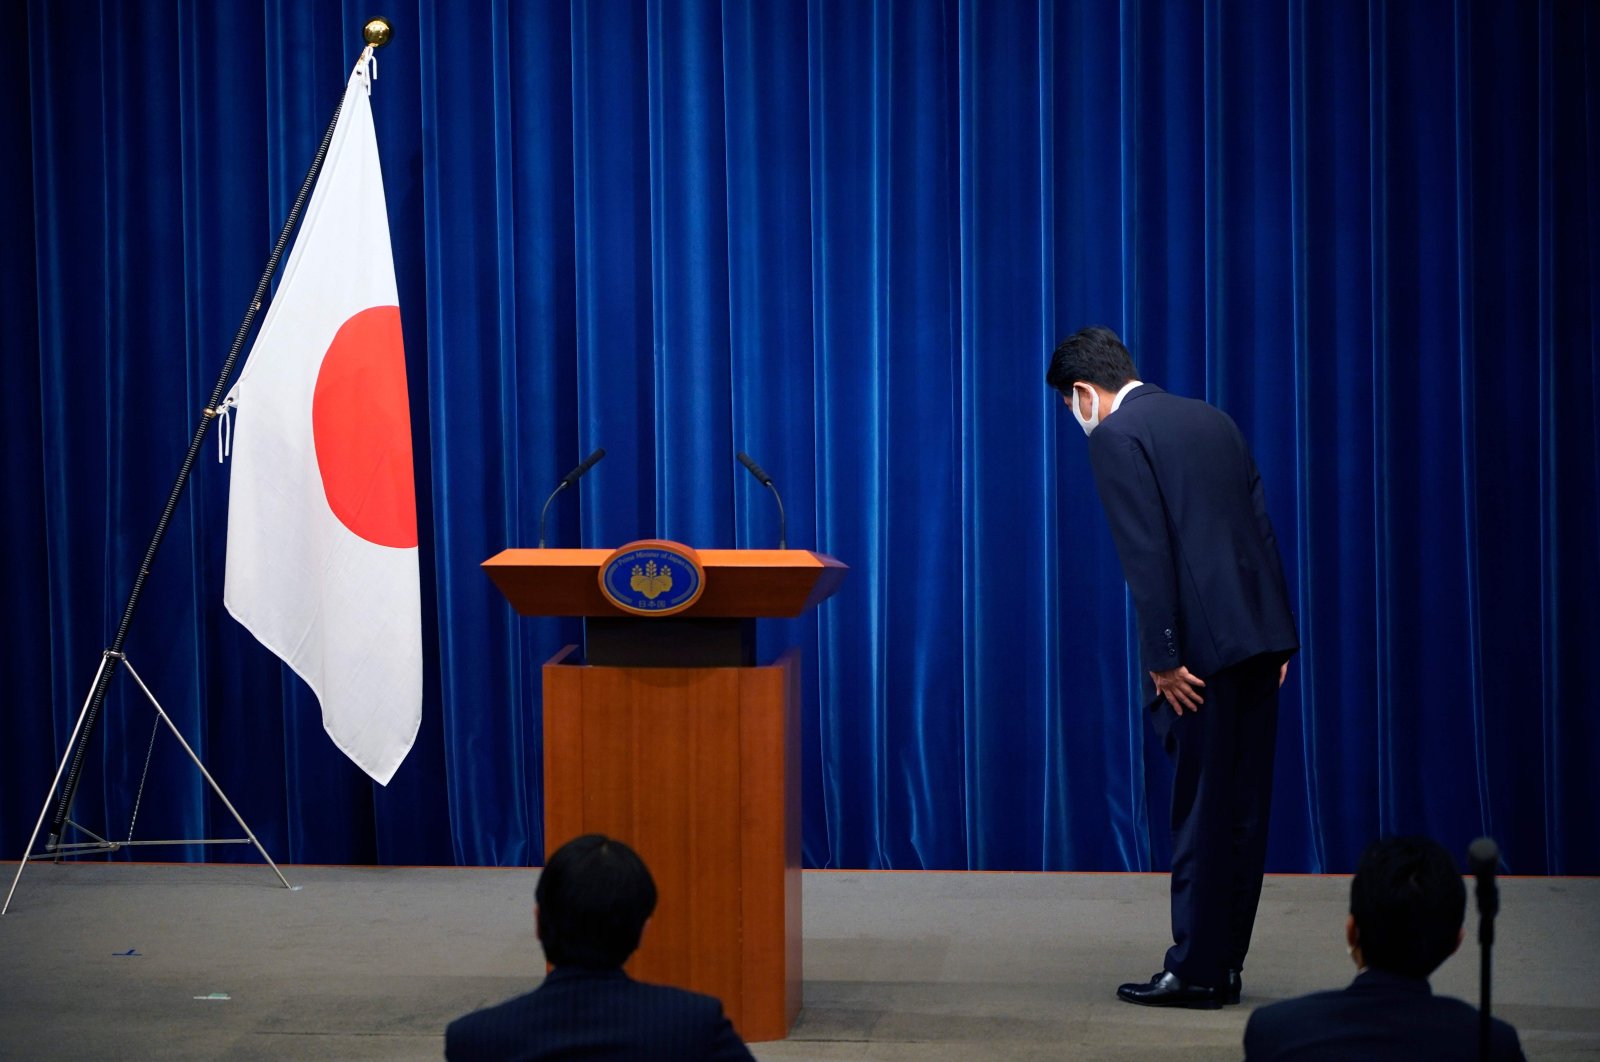 Japanese Prime Minister Shinzo Abe bows to the national flag at the start of a press conference at the prime minister official residence in Tokyo, Aug. 28, 2020. (AFP Photo)